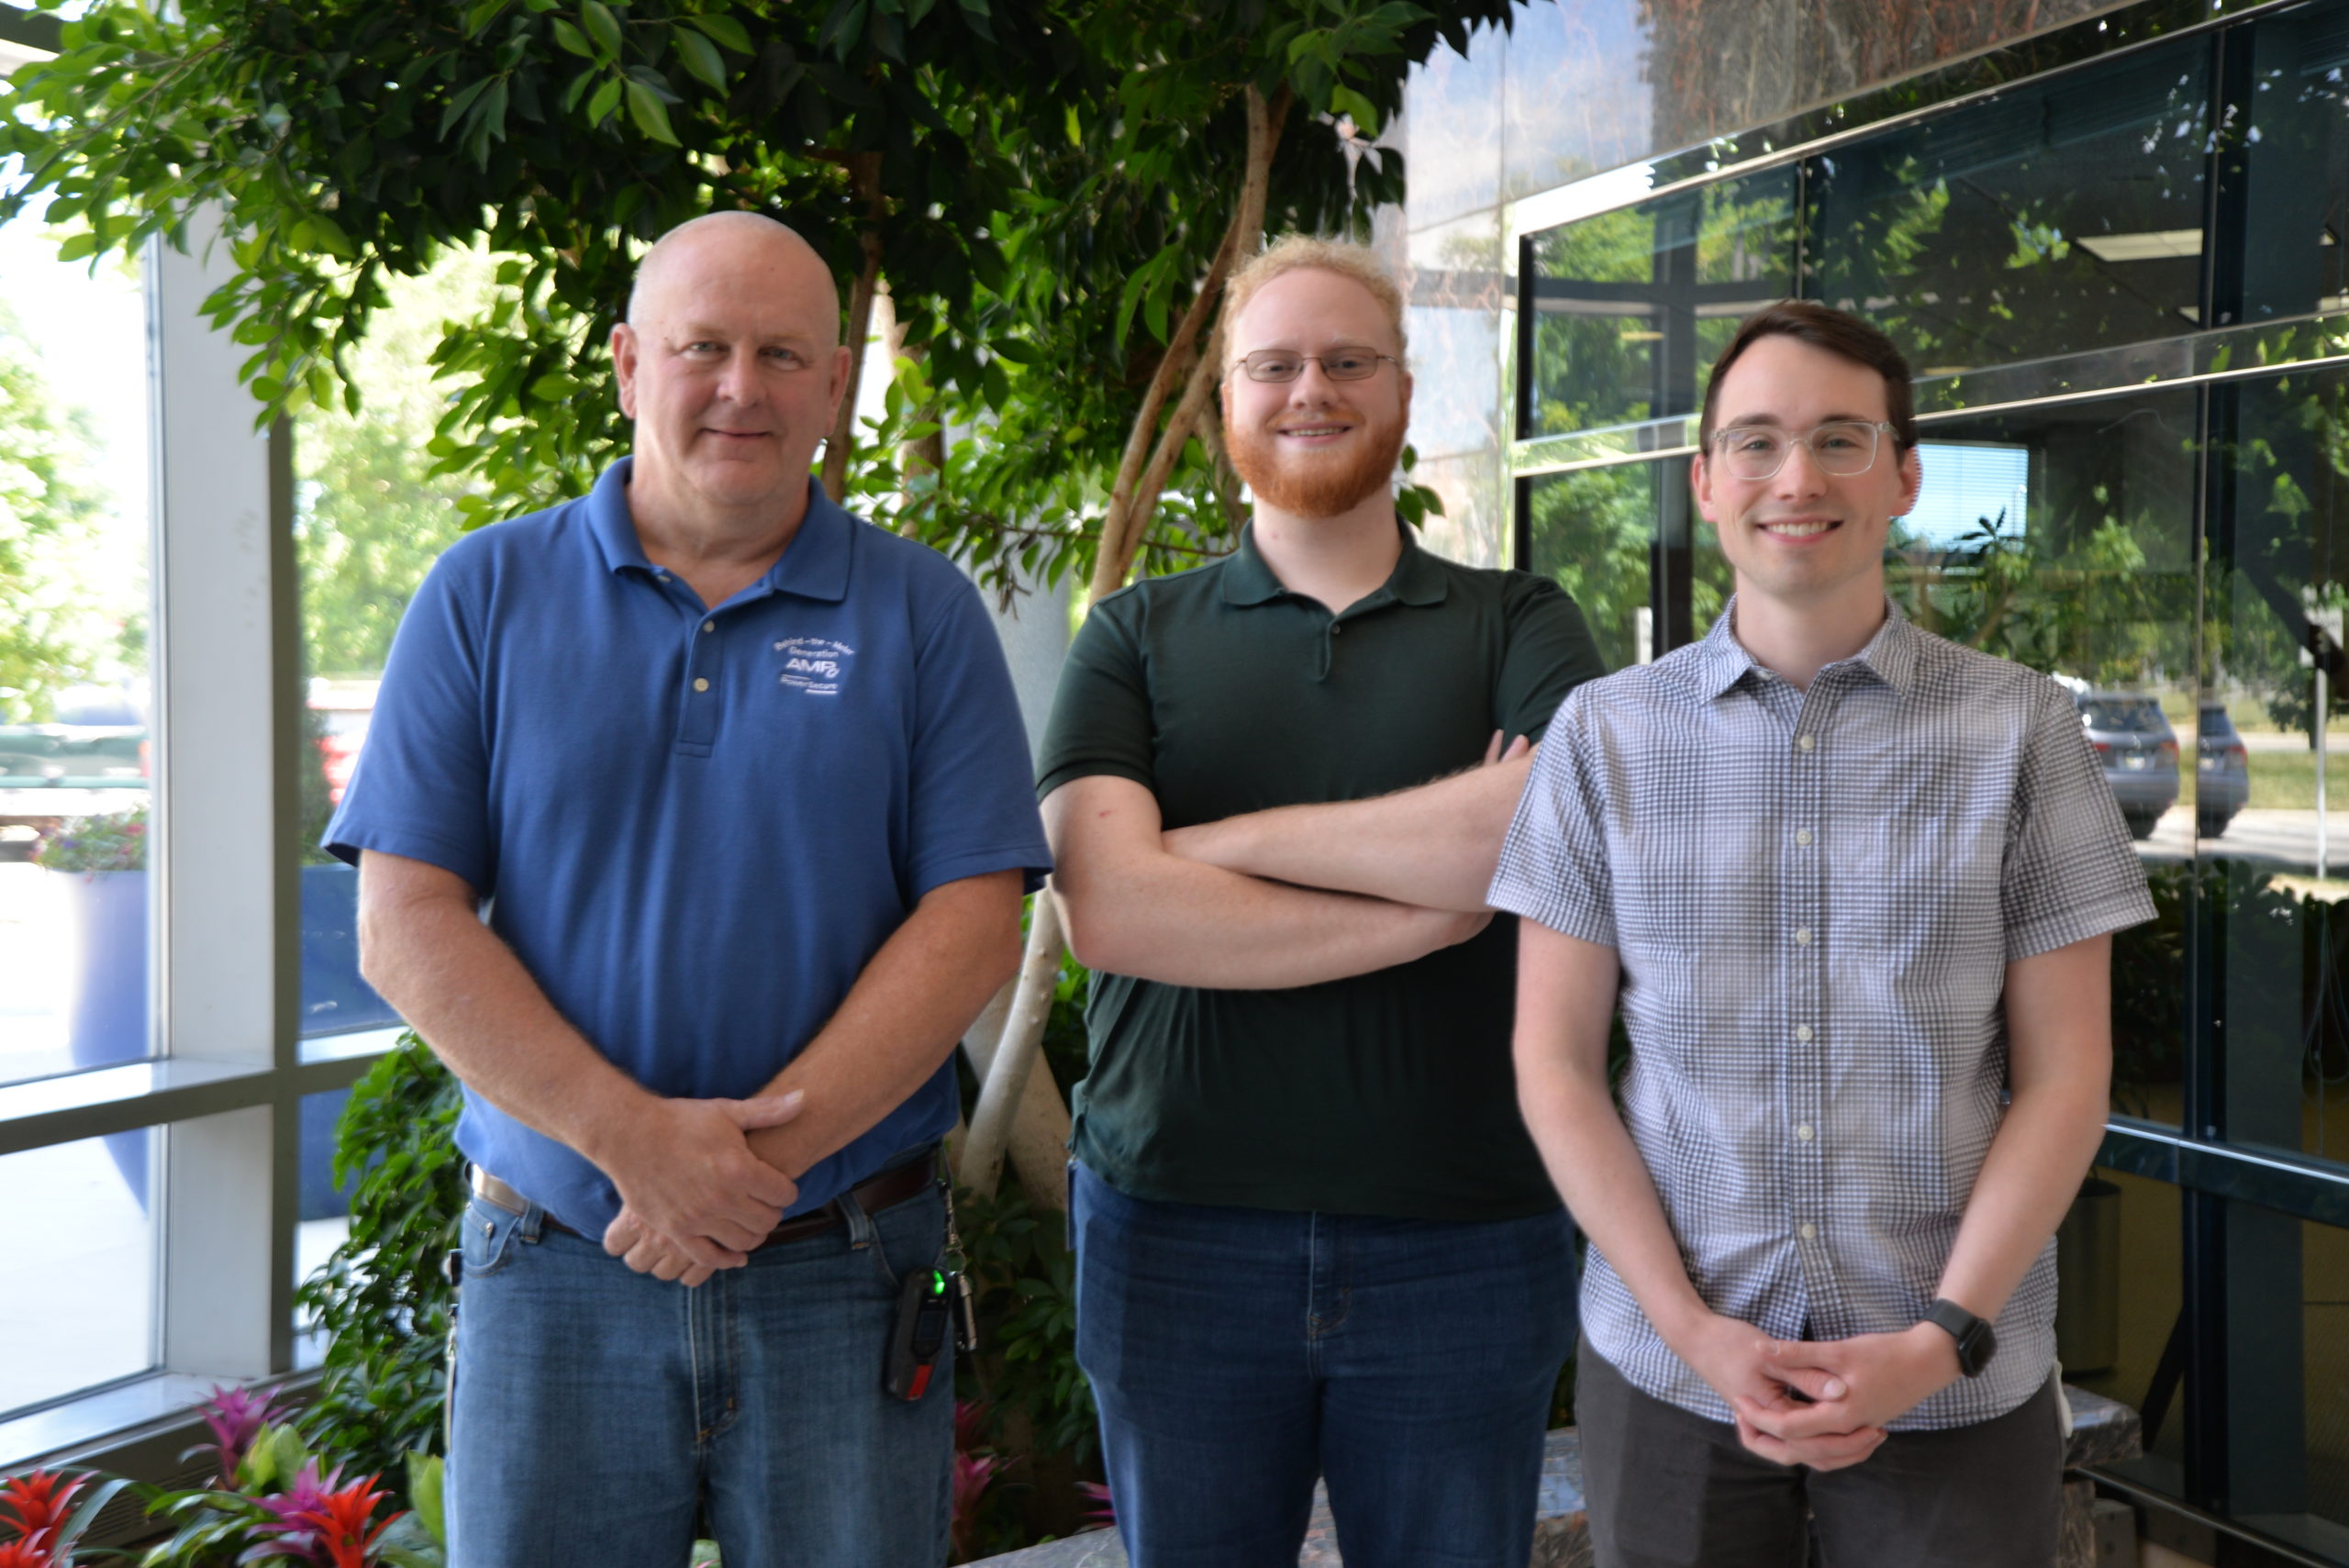 From left: Elmer Baker, SCADA technician; Joe Morris, manager of SCADA and real time systems; and Caleb Haley, senior systems engineer.